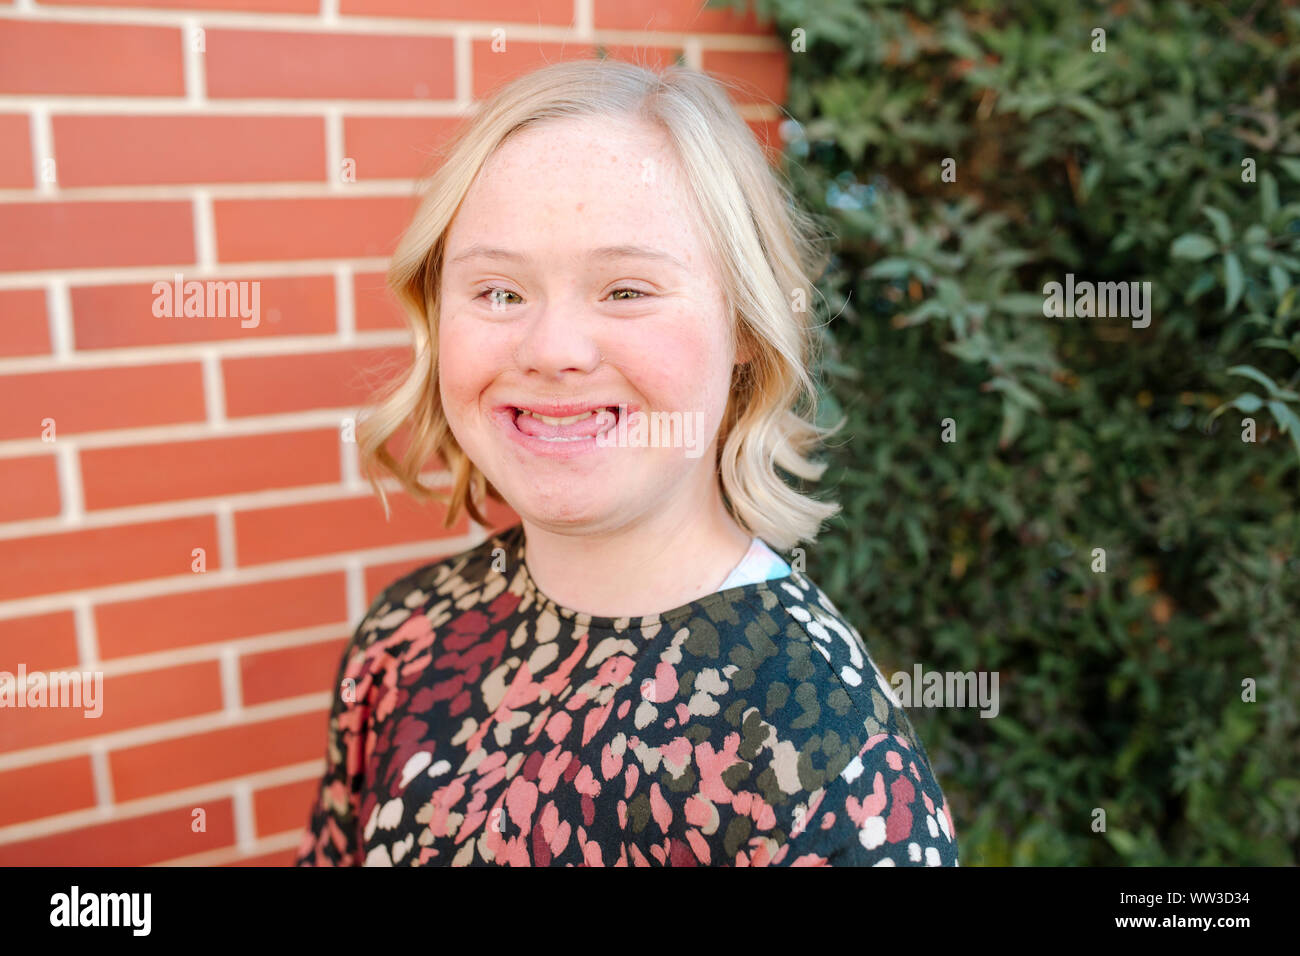 Smiling teen girl with Down Syndrome by brick wall in San Diego Stock Photo